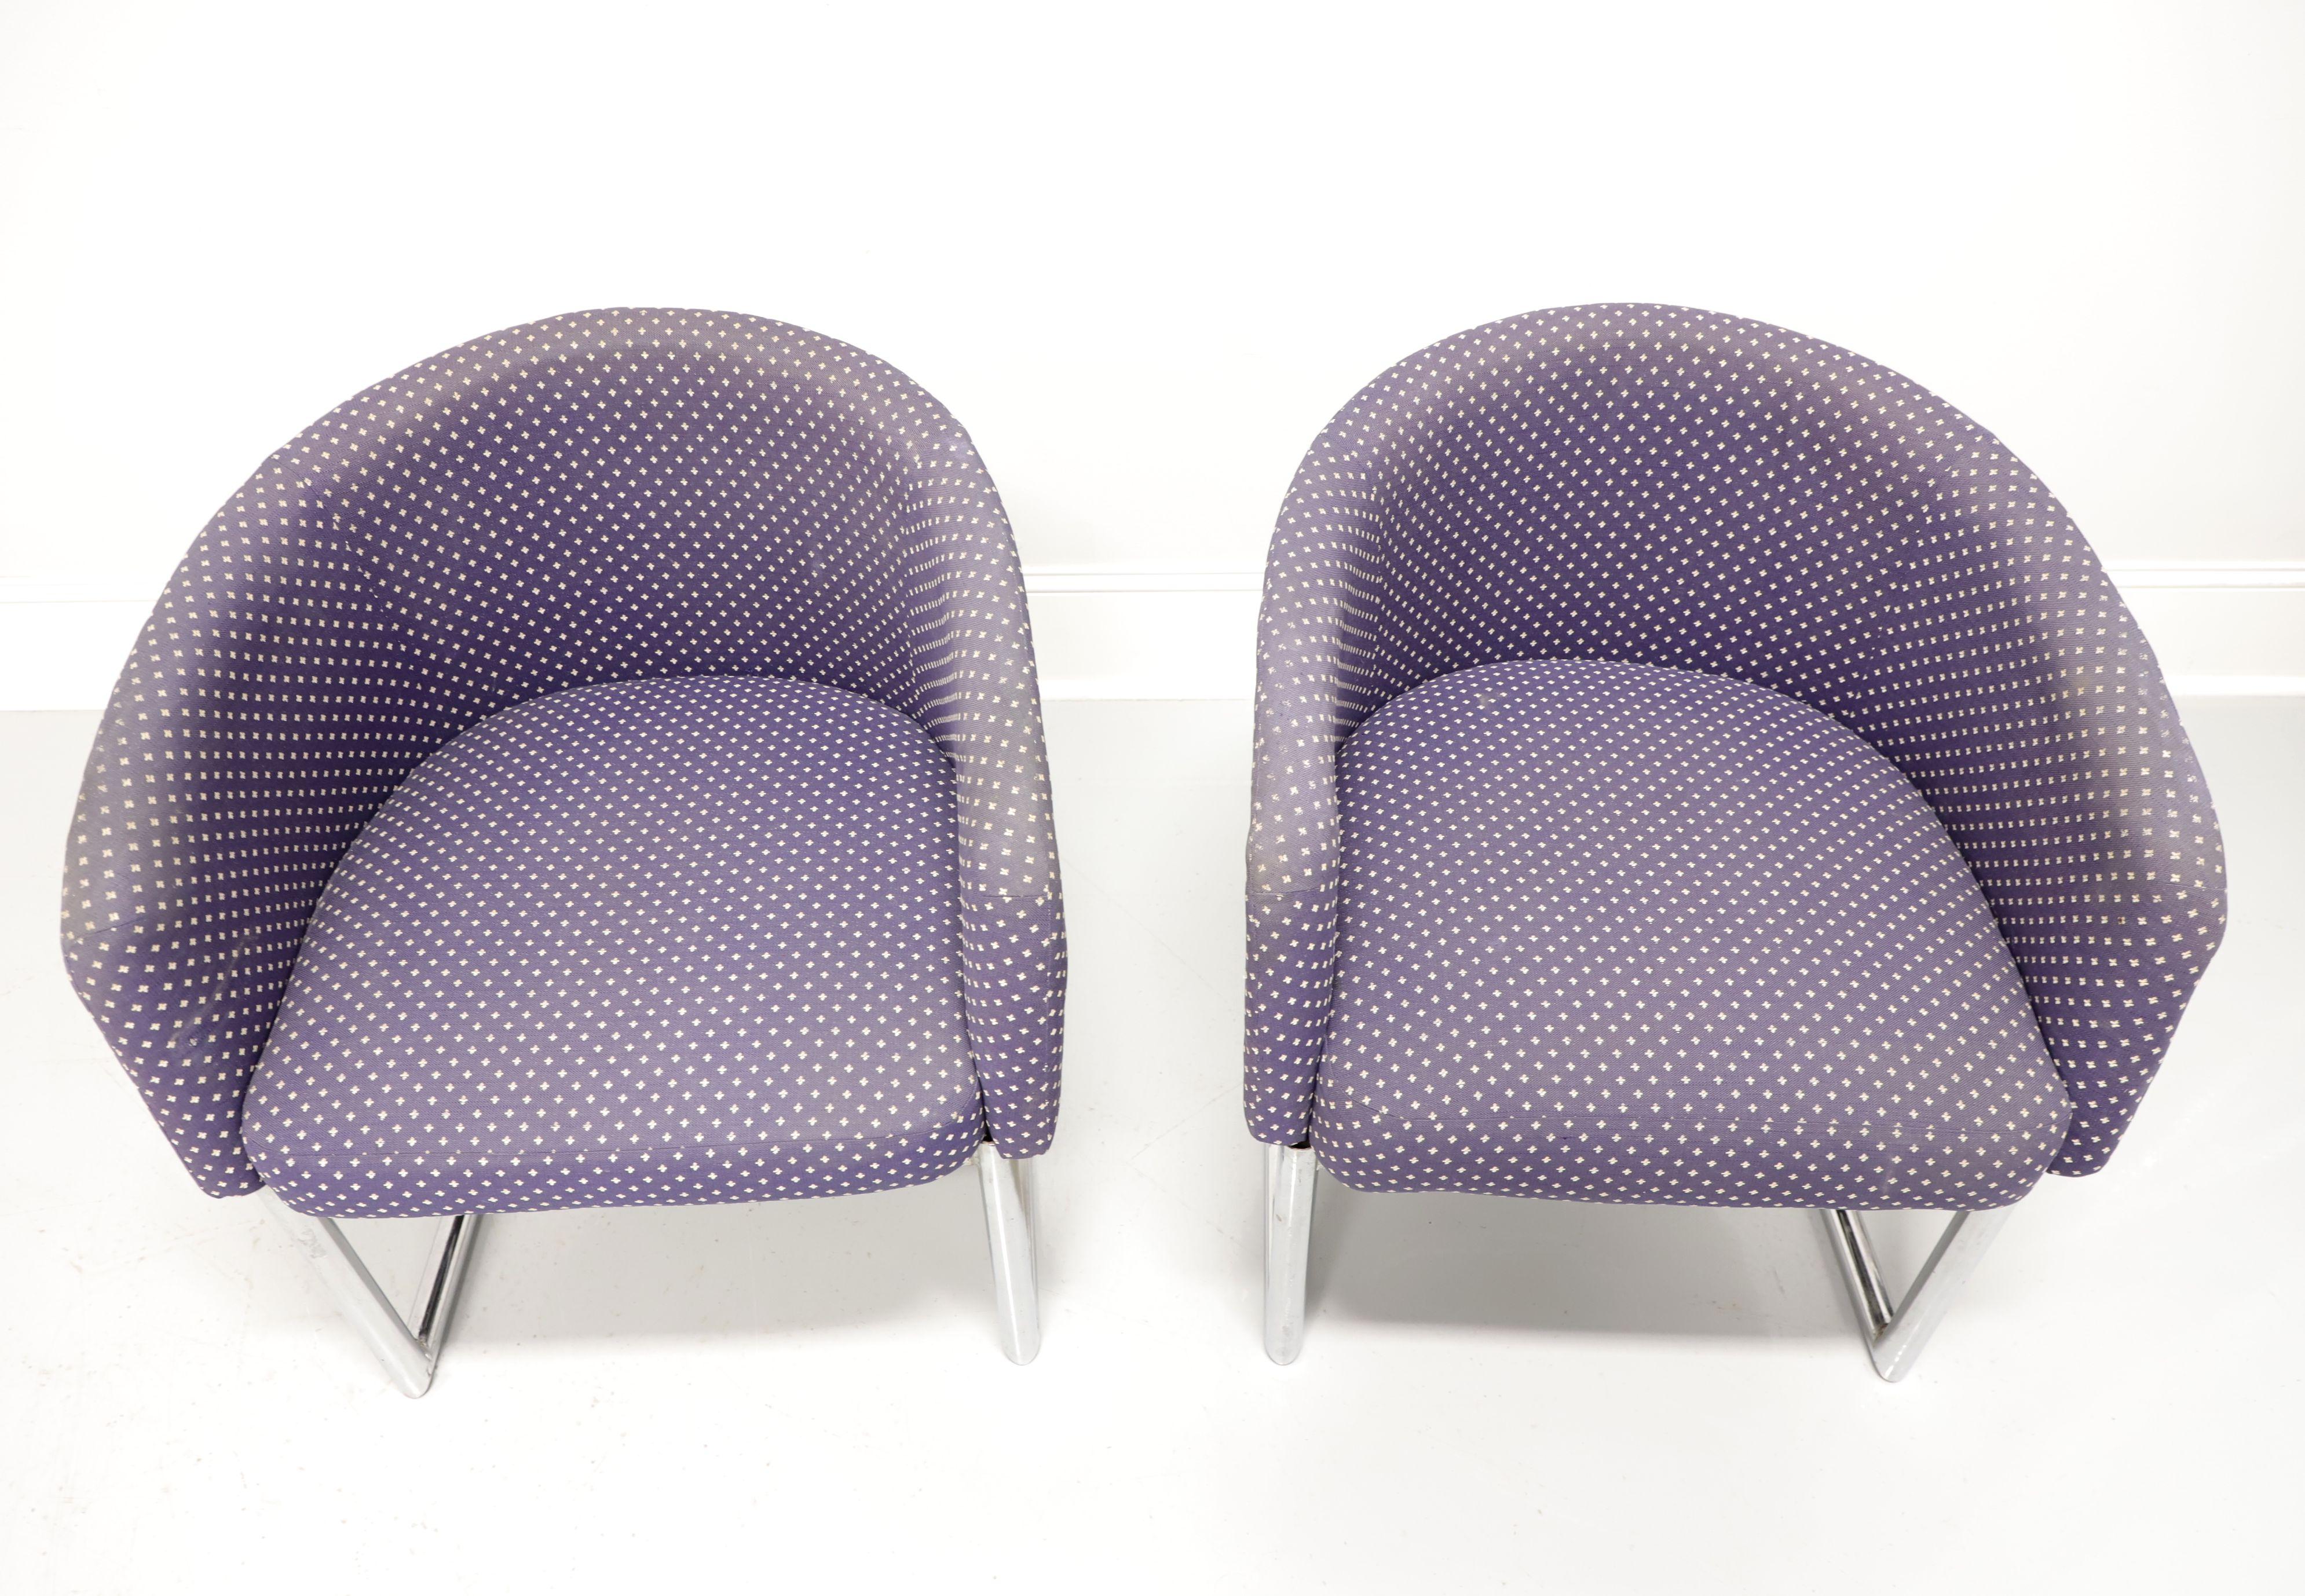 A pair of mid 20th century Contemporary style cantilever chairs, unbranded. Chrome frame, barrel back design, purplish blue & beige color fabric upholstered backs, arms and seats. Made in the USA, in the mid 20th Century.

Measures: Overall: 24.75 W